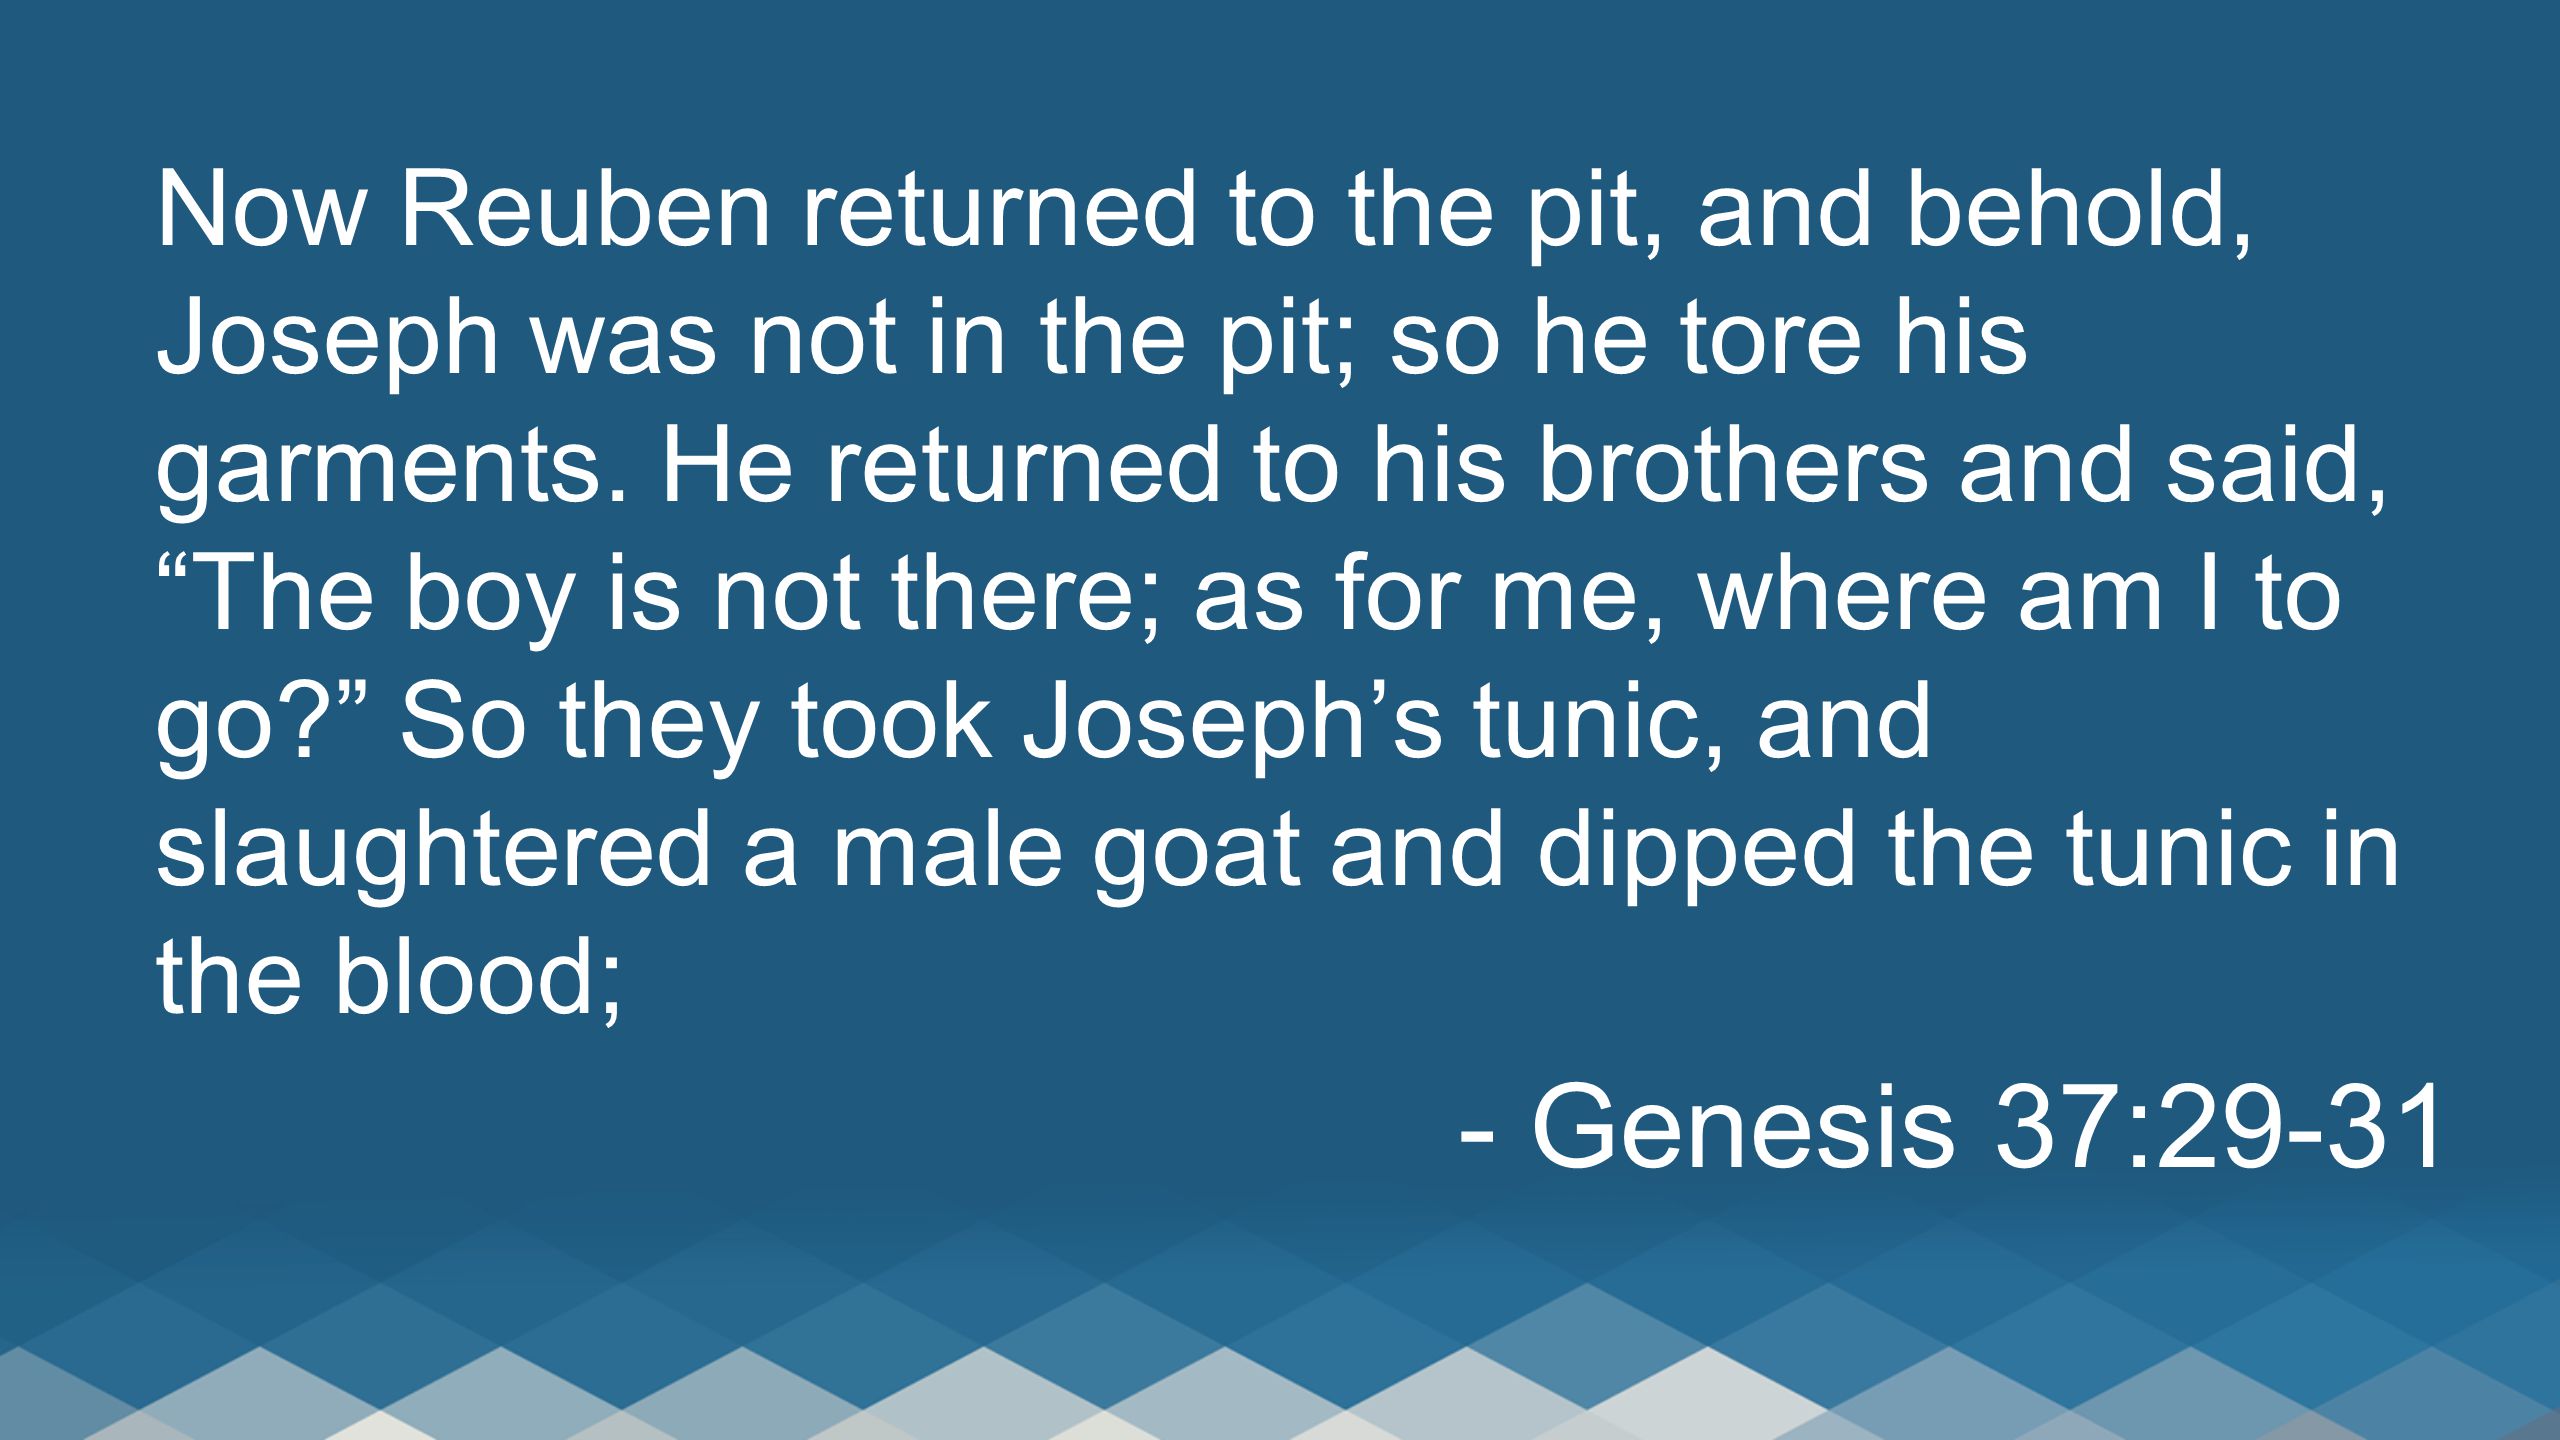 Now Reuben returned to the pit, and behold, Joseph was not in the pit; so he tore his garments.